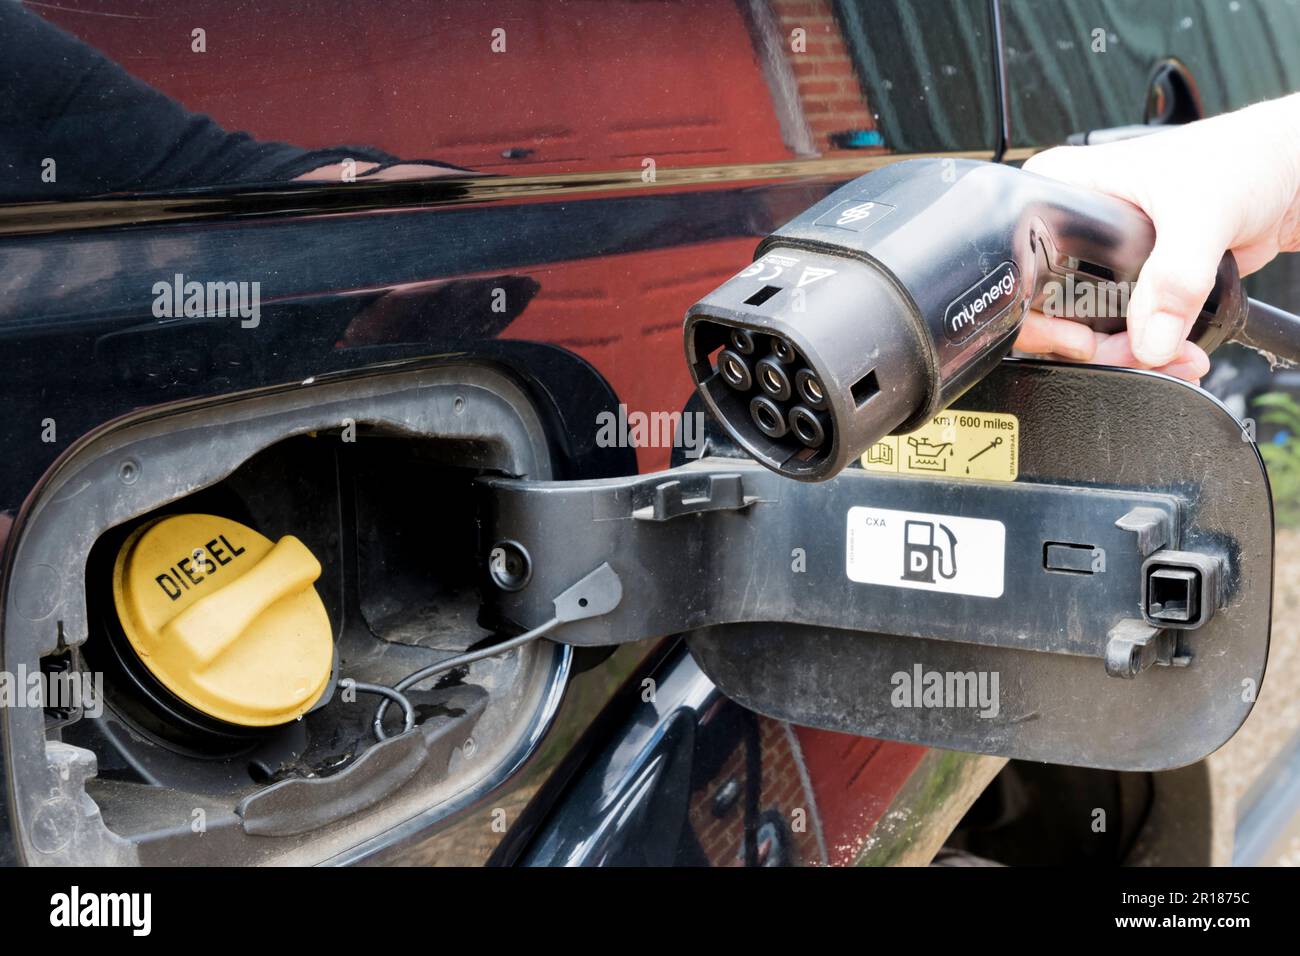 Connector for an electric vehicle charger next to the diesel tank filler cap of a car using fossil fuel. Stock Photo